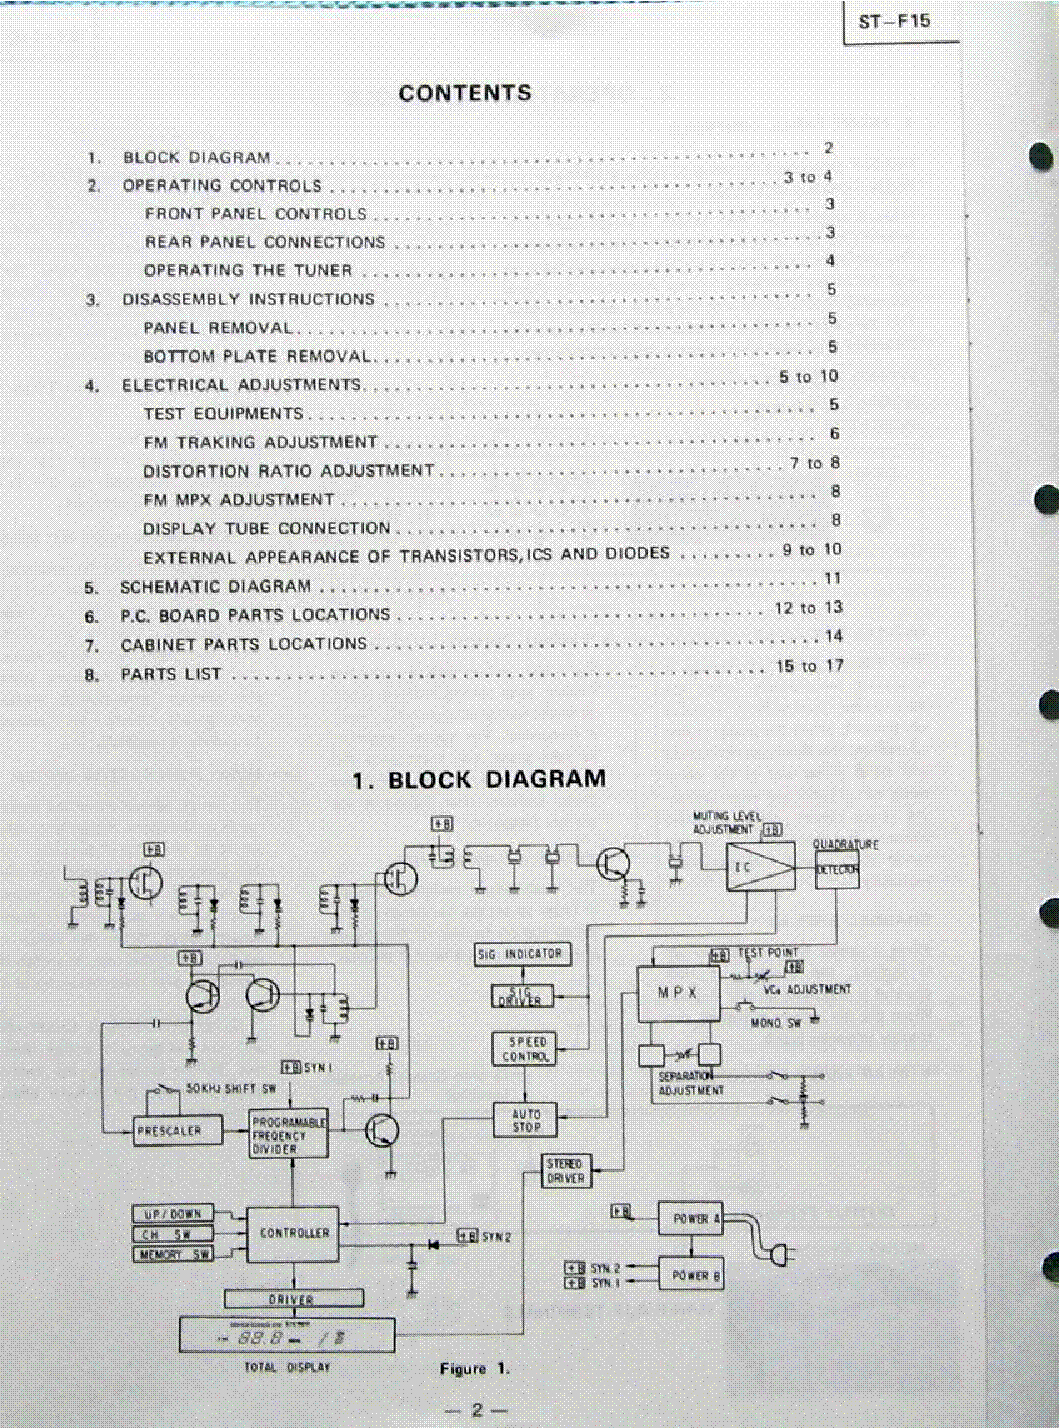 TOSHIBA ST-F15 TUNER SM service manual (2nd page)